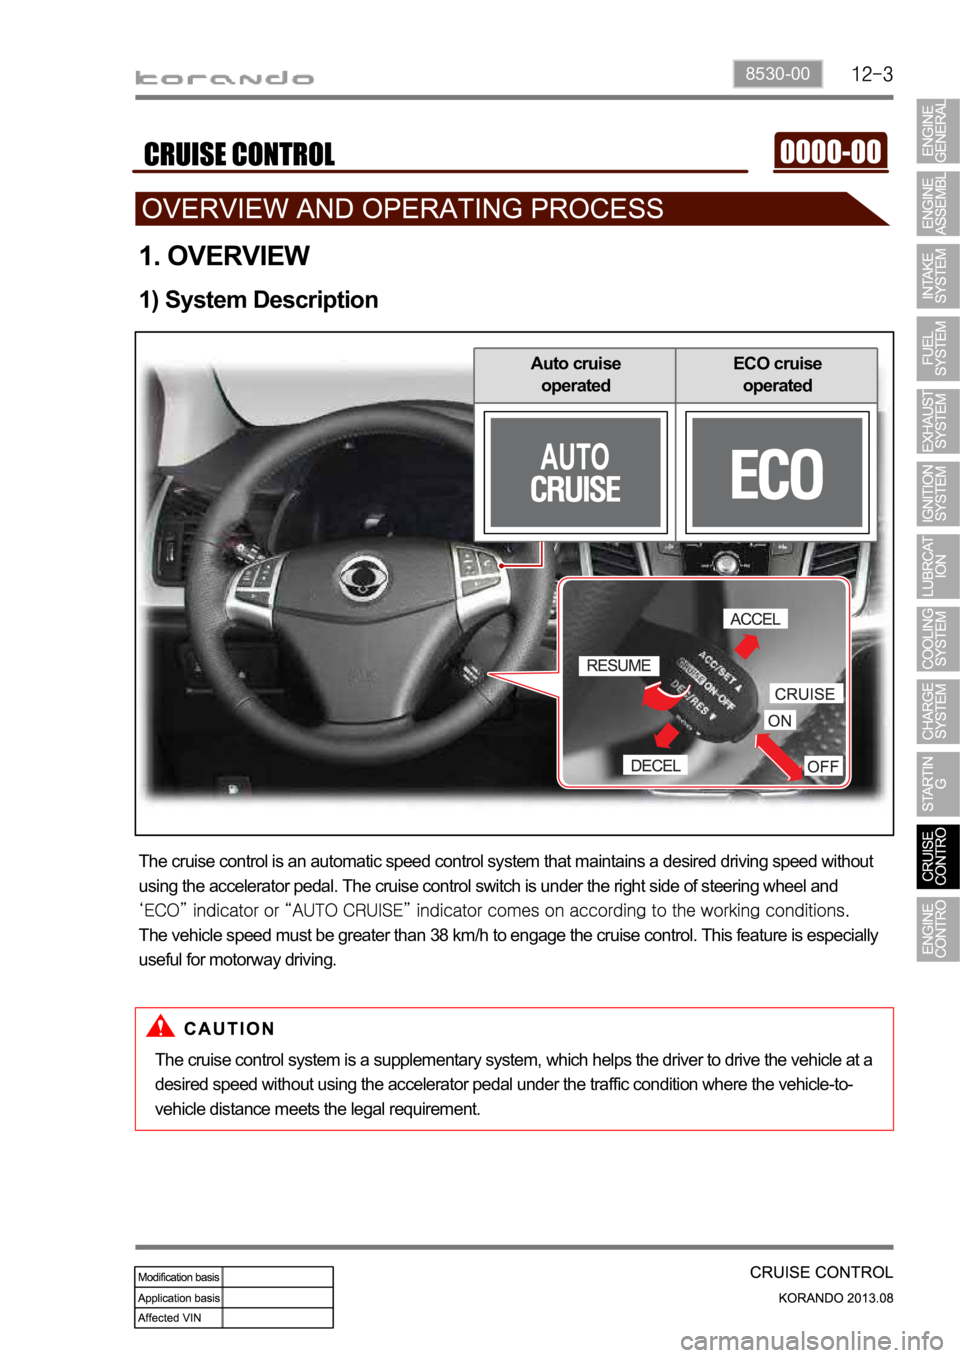 SSANGYONG KORANDO 2013 User Guide 8530-00
1. OVERVIEW
1) System Description
The cruise control is an automatic speed control system that maintains a desired driving speed without 
using the accelerator pedal. The cruise control switch